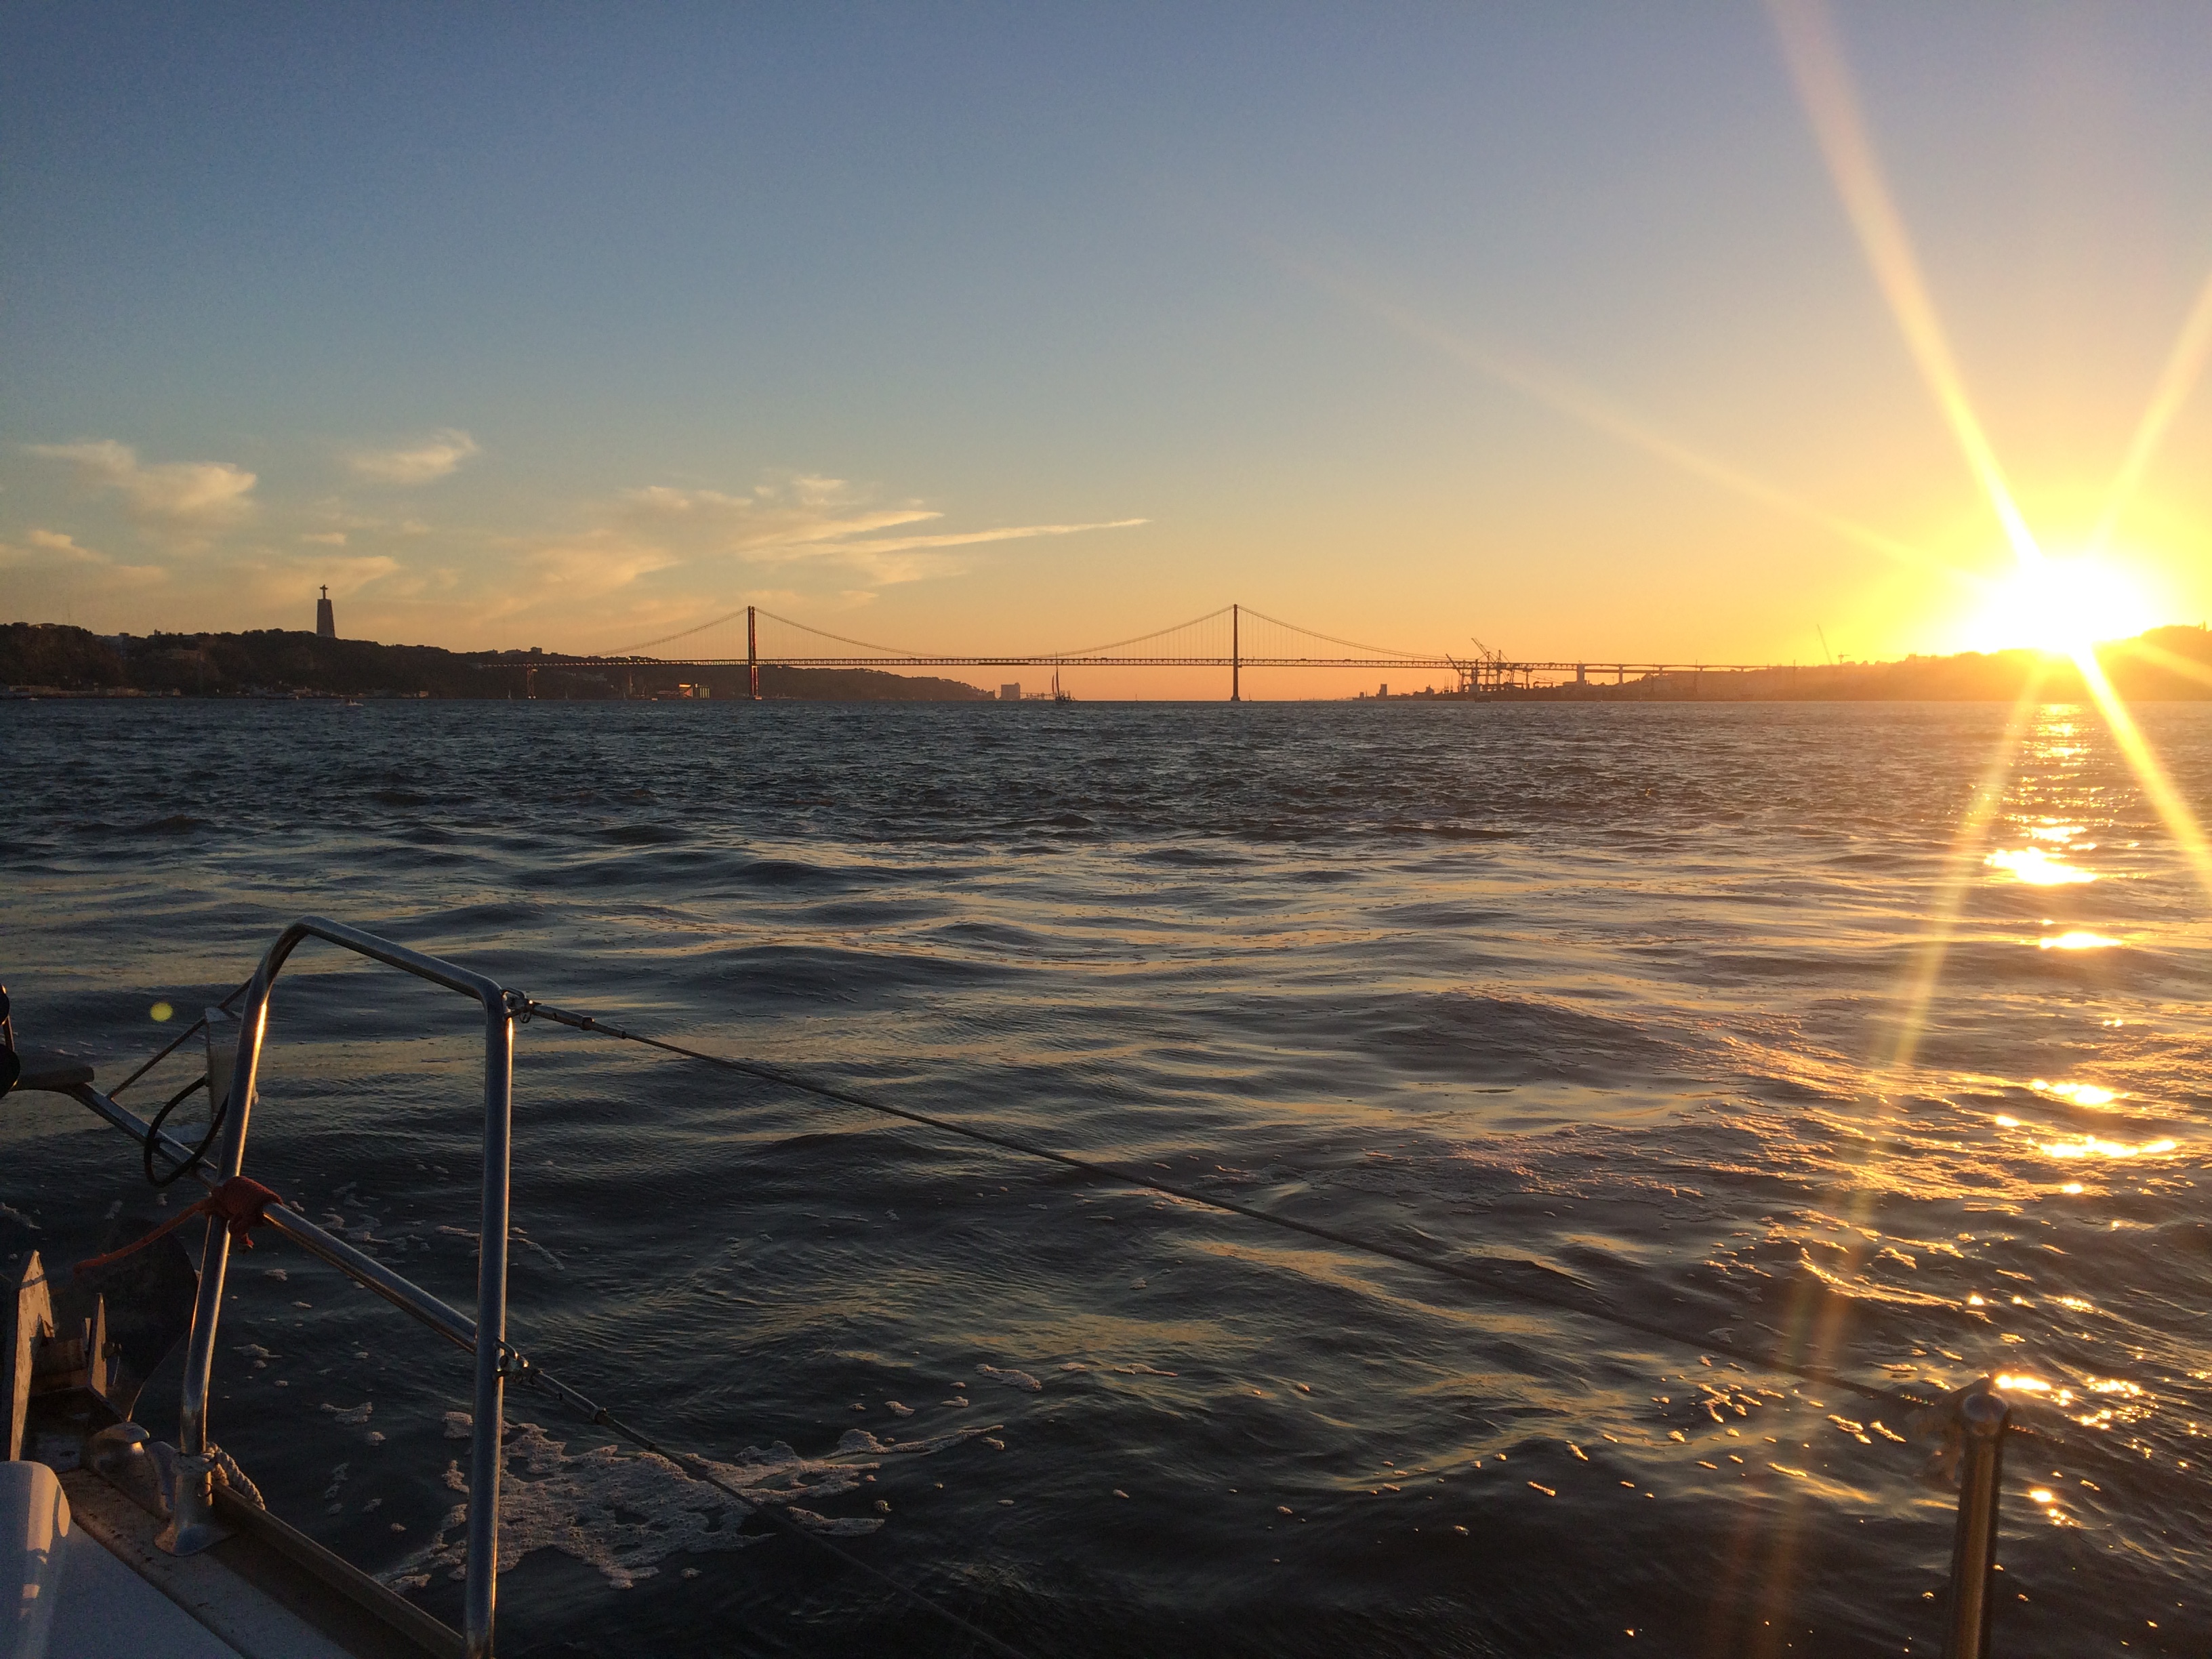 View from a private yacht on Tejo river in Lisbon